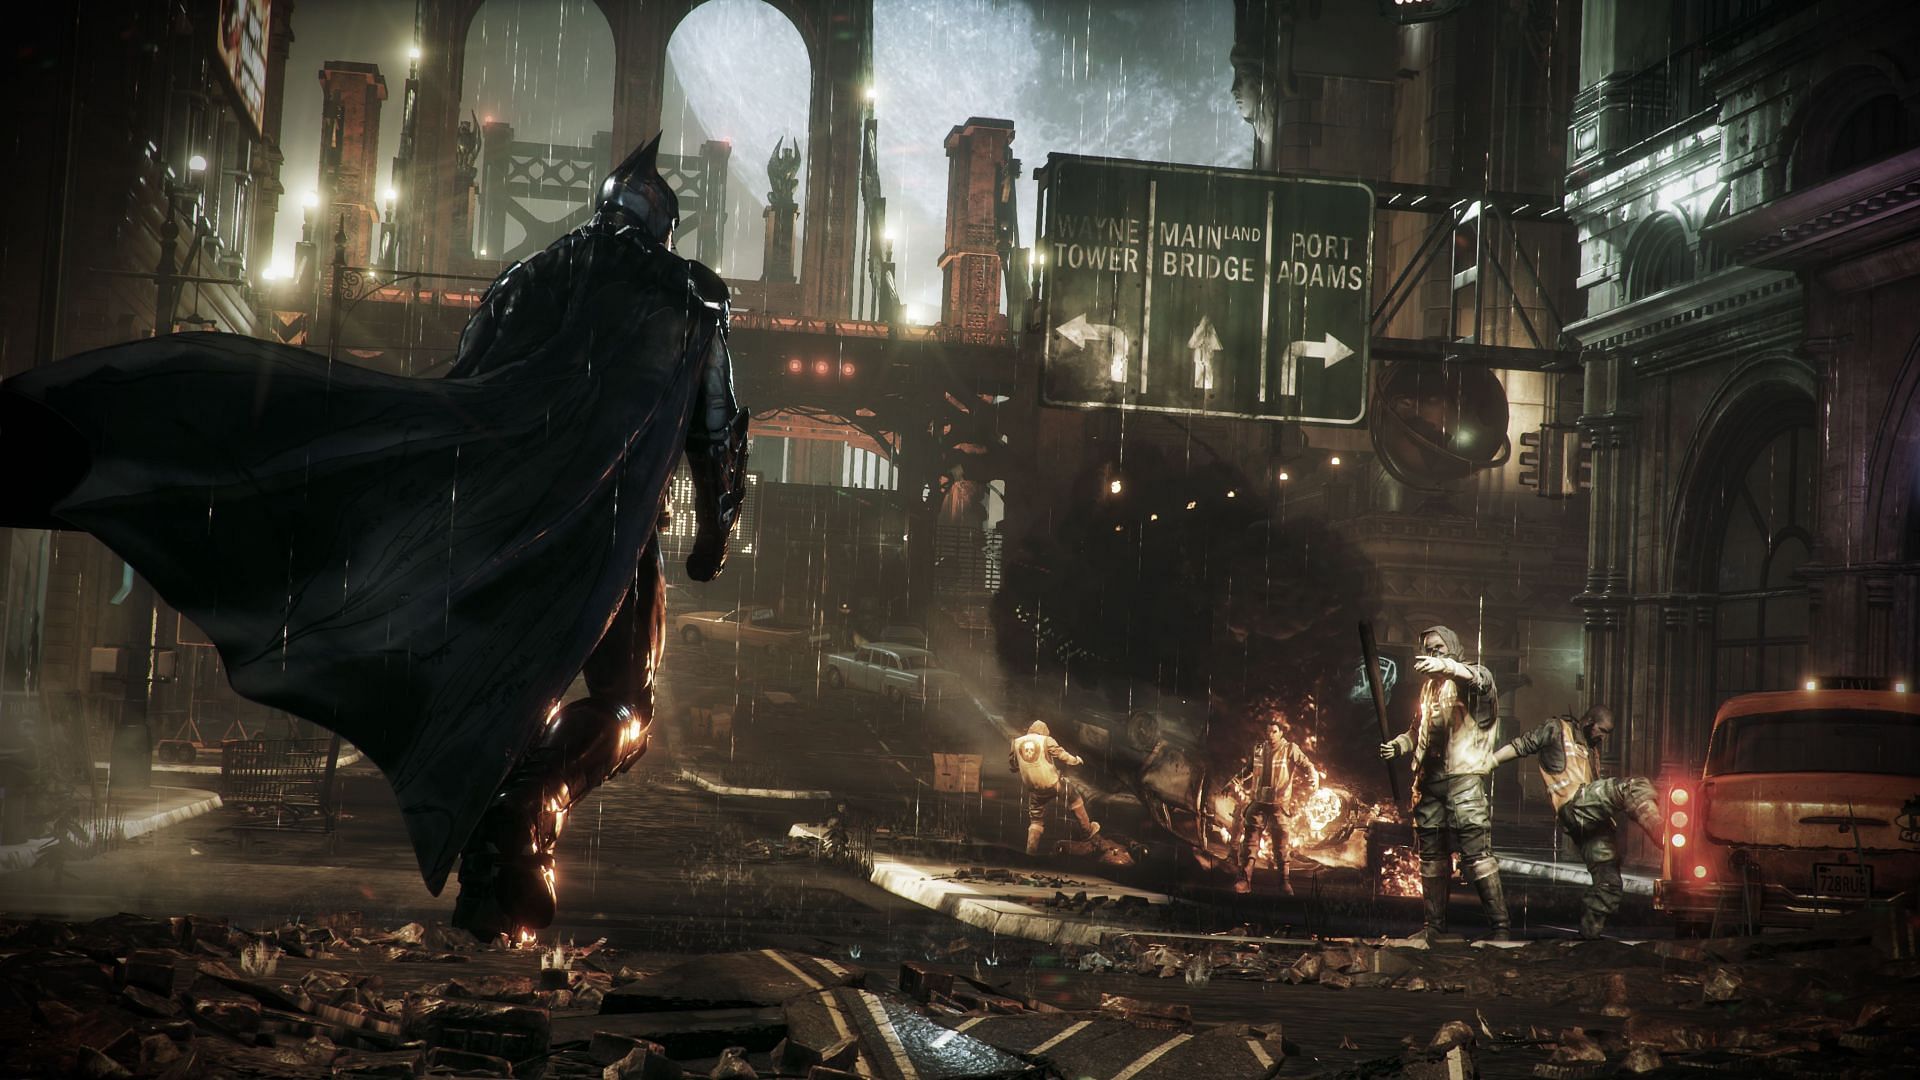 Play as the Caped Crusader in Arkham Knight (Image via DC)